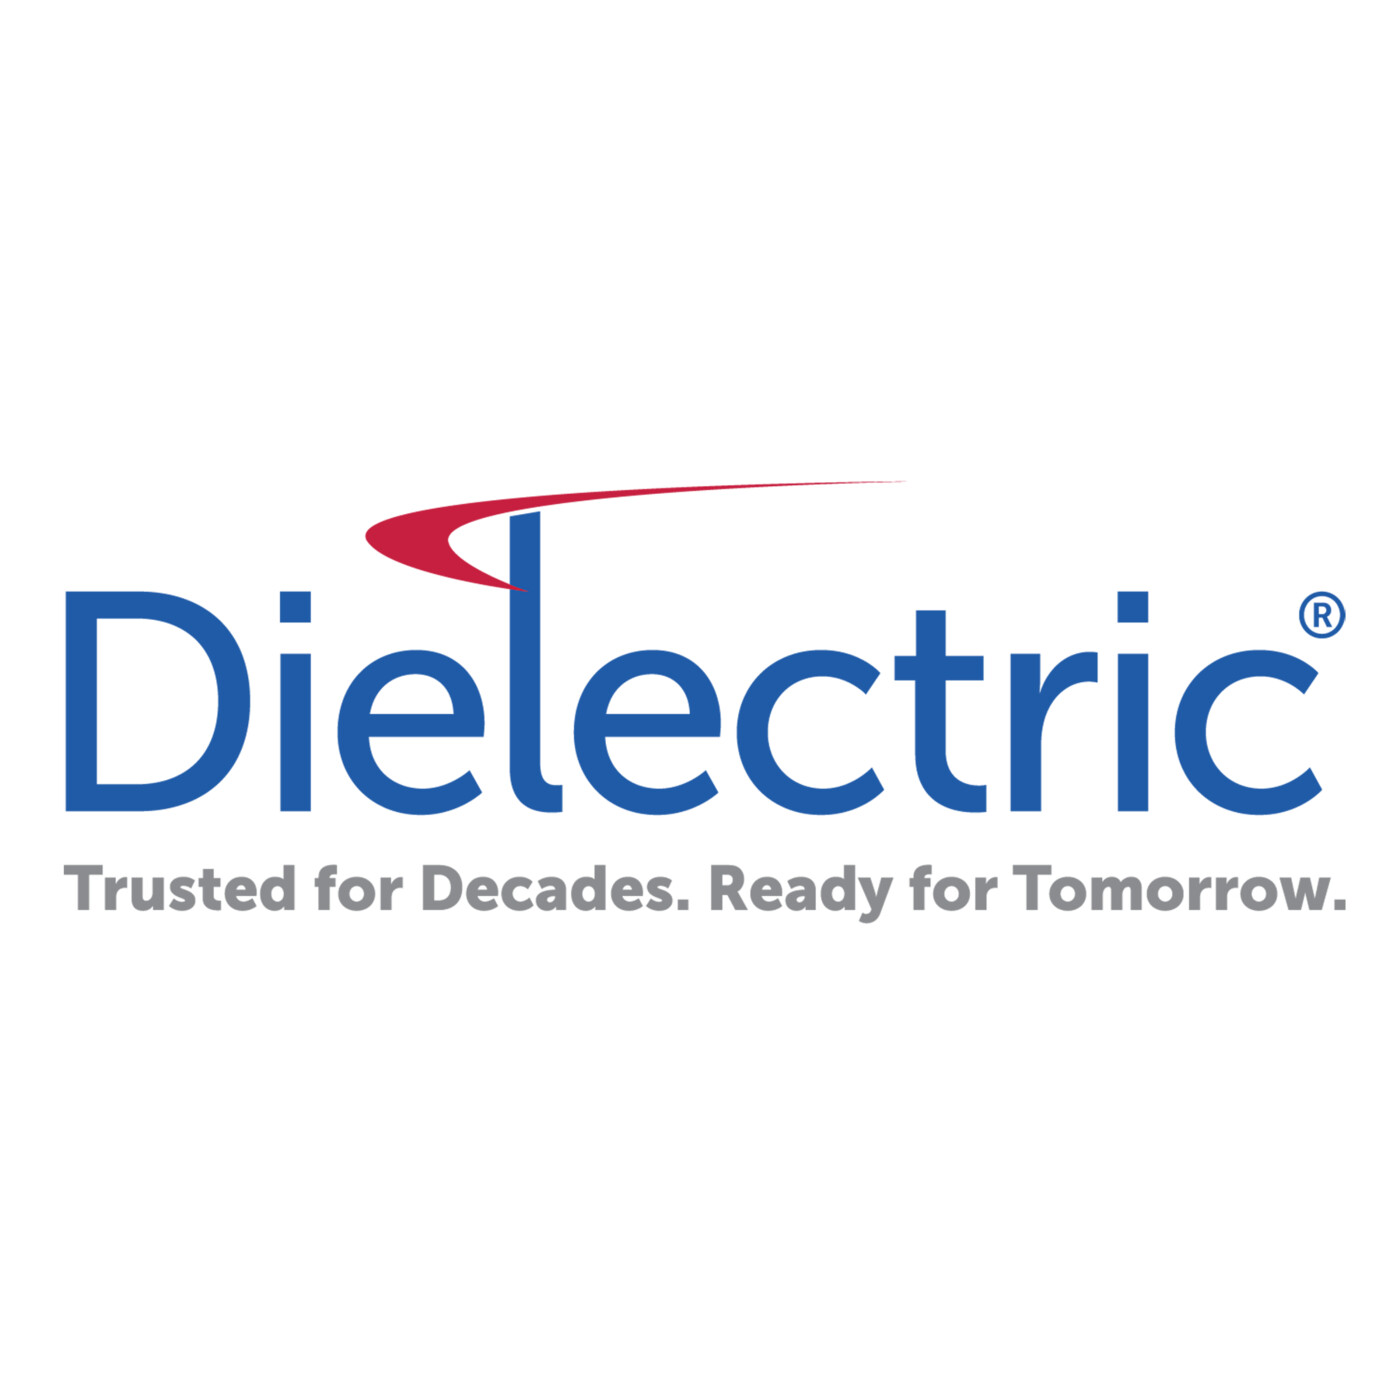 Shane Cyr on Dielectric's Journey to the Empire State Building